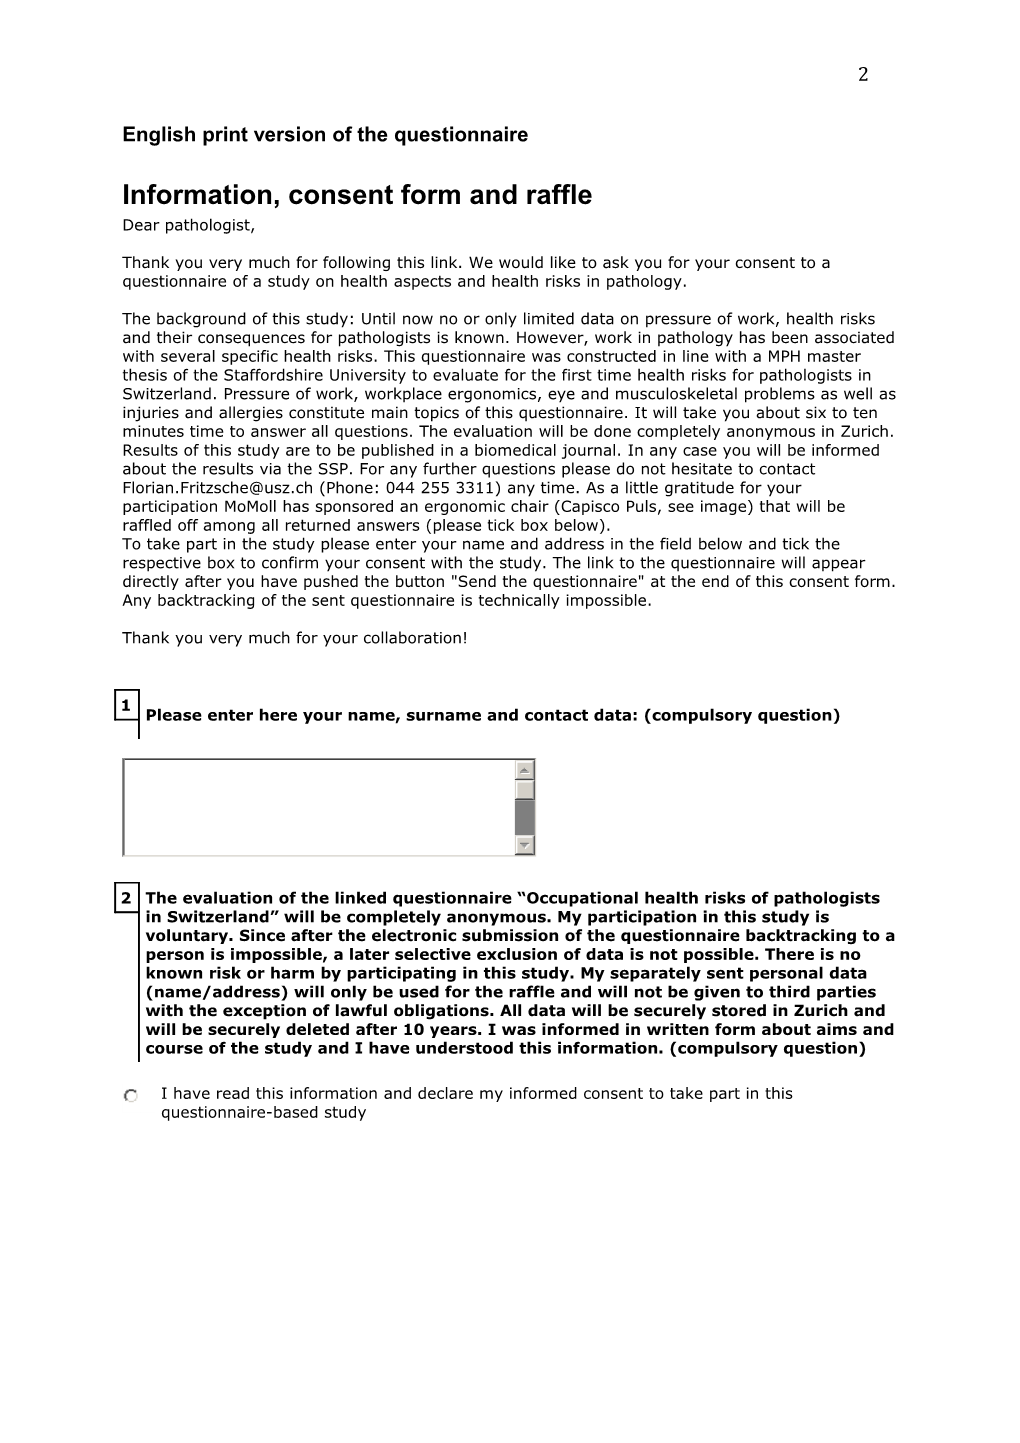 English Print Version of the Questionnaire